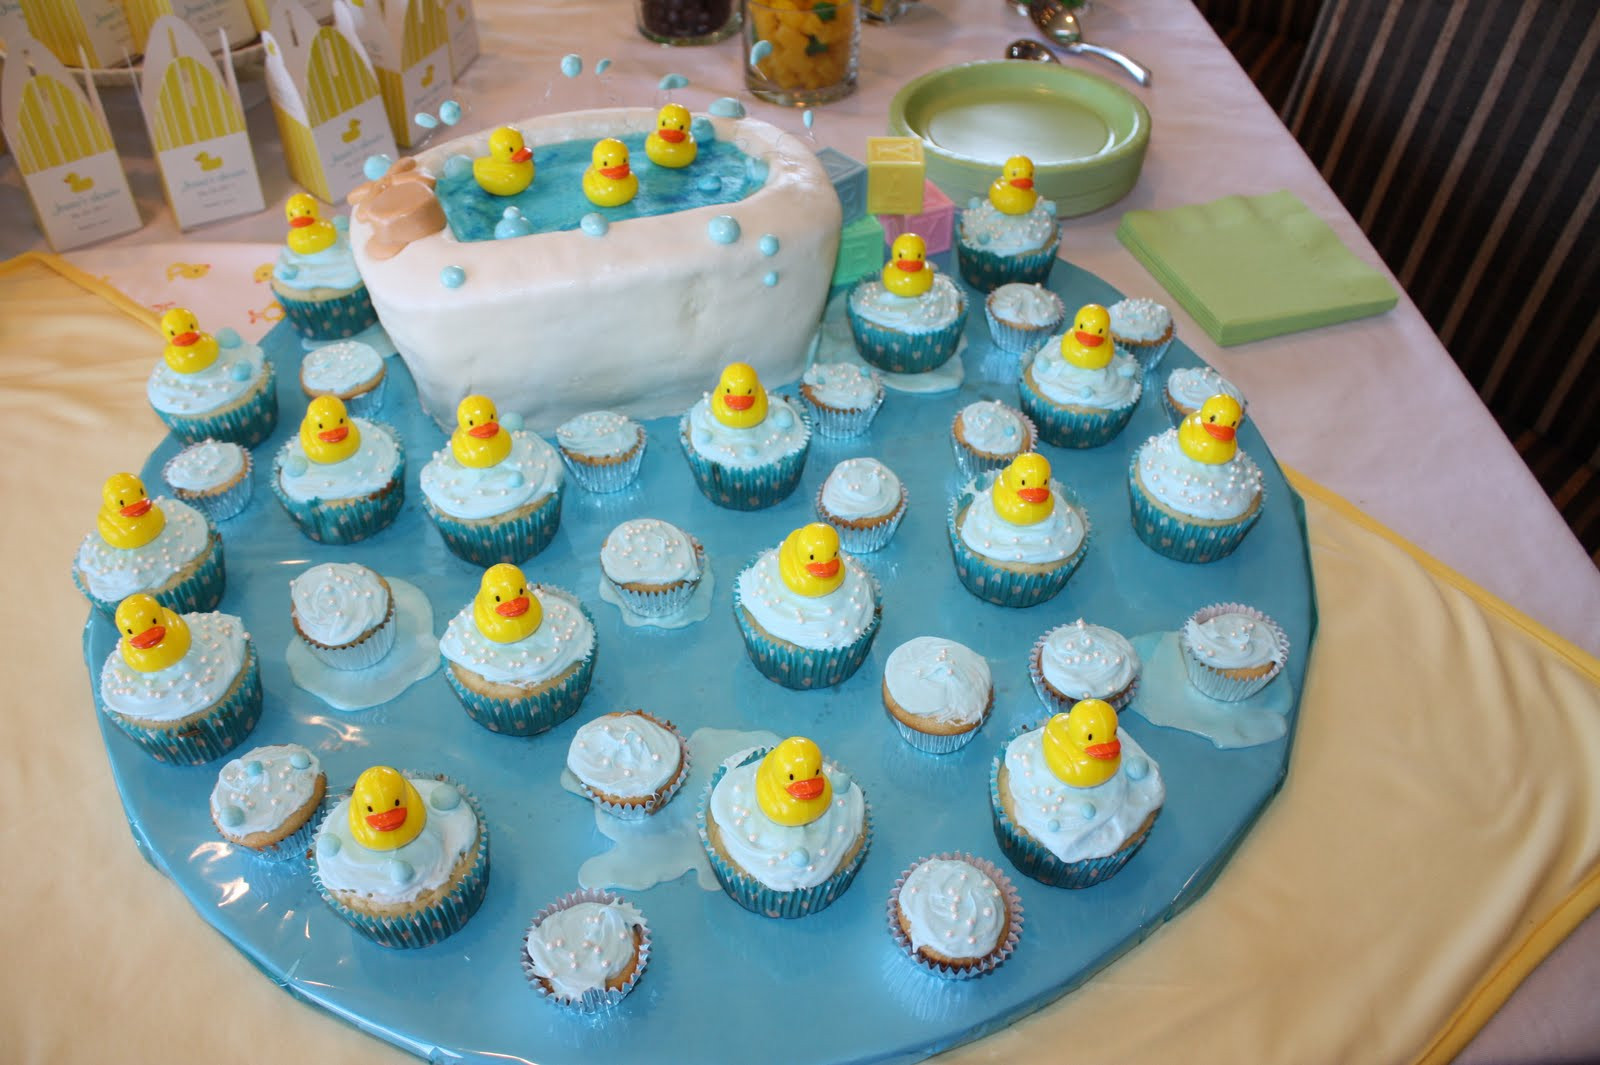 Cute Baby Shower Gift Ideas For Boys
 70 Baby Shower Cakes and Cupcakes Ideas